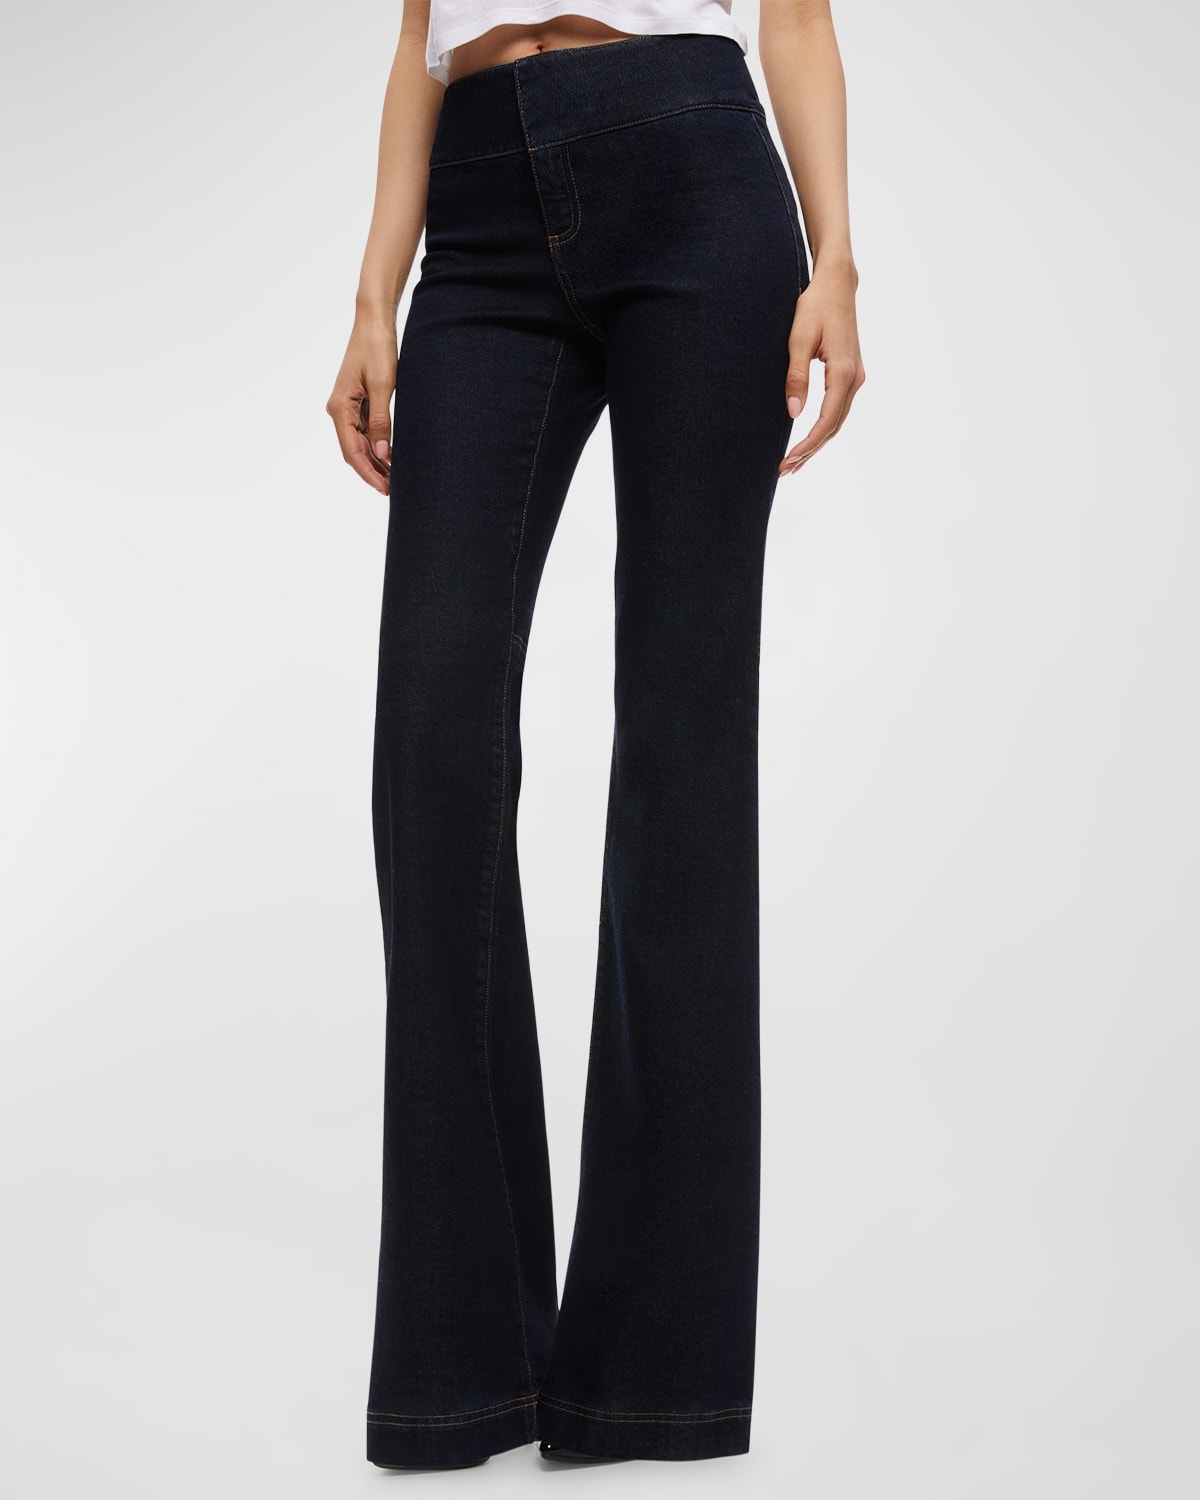 ALICE AND OLIVIA OLIVIA BOOTCUT JEANS